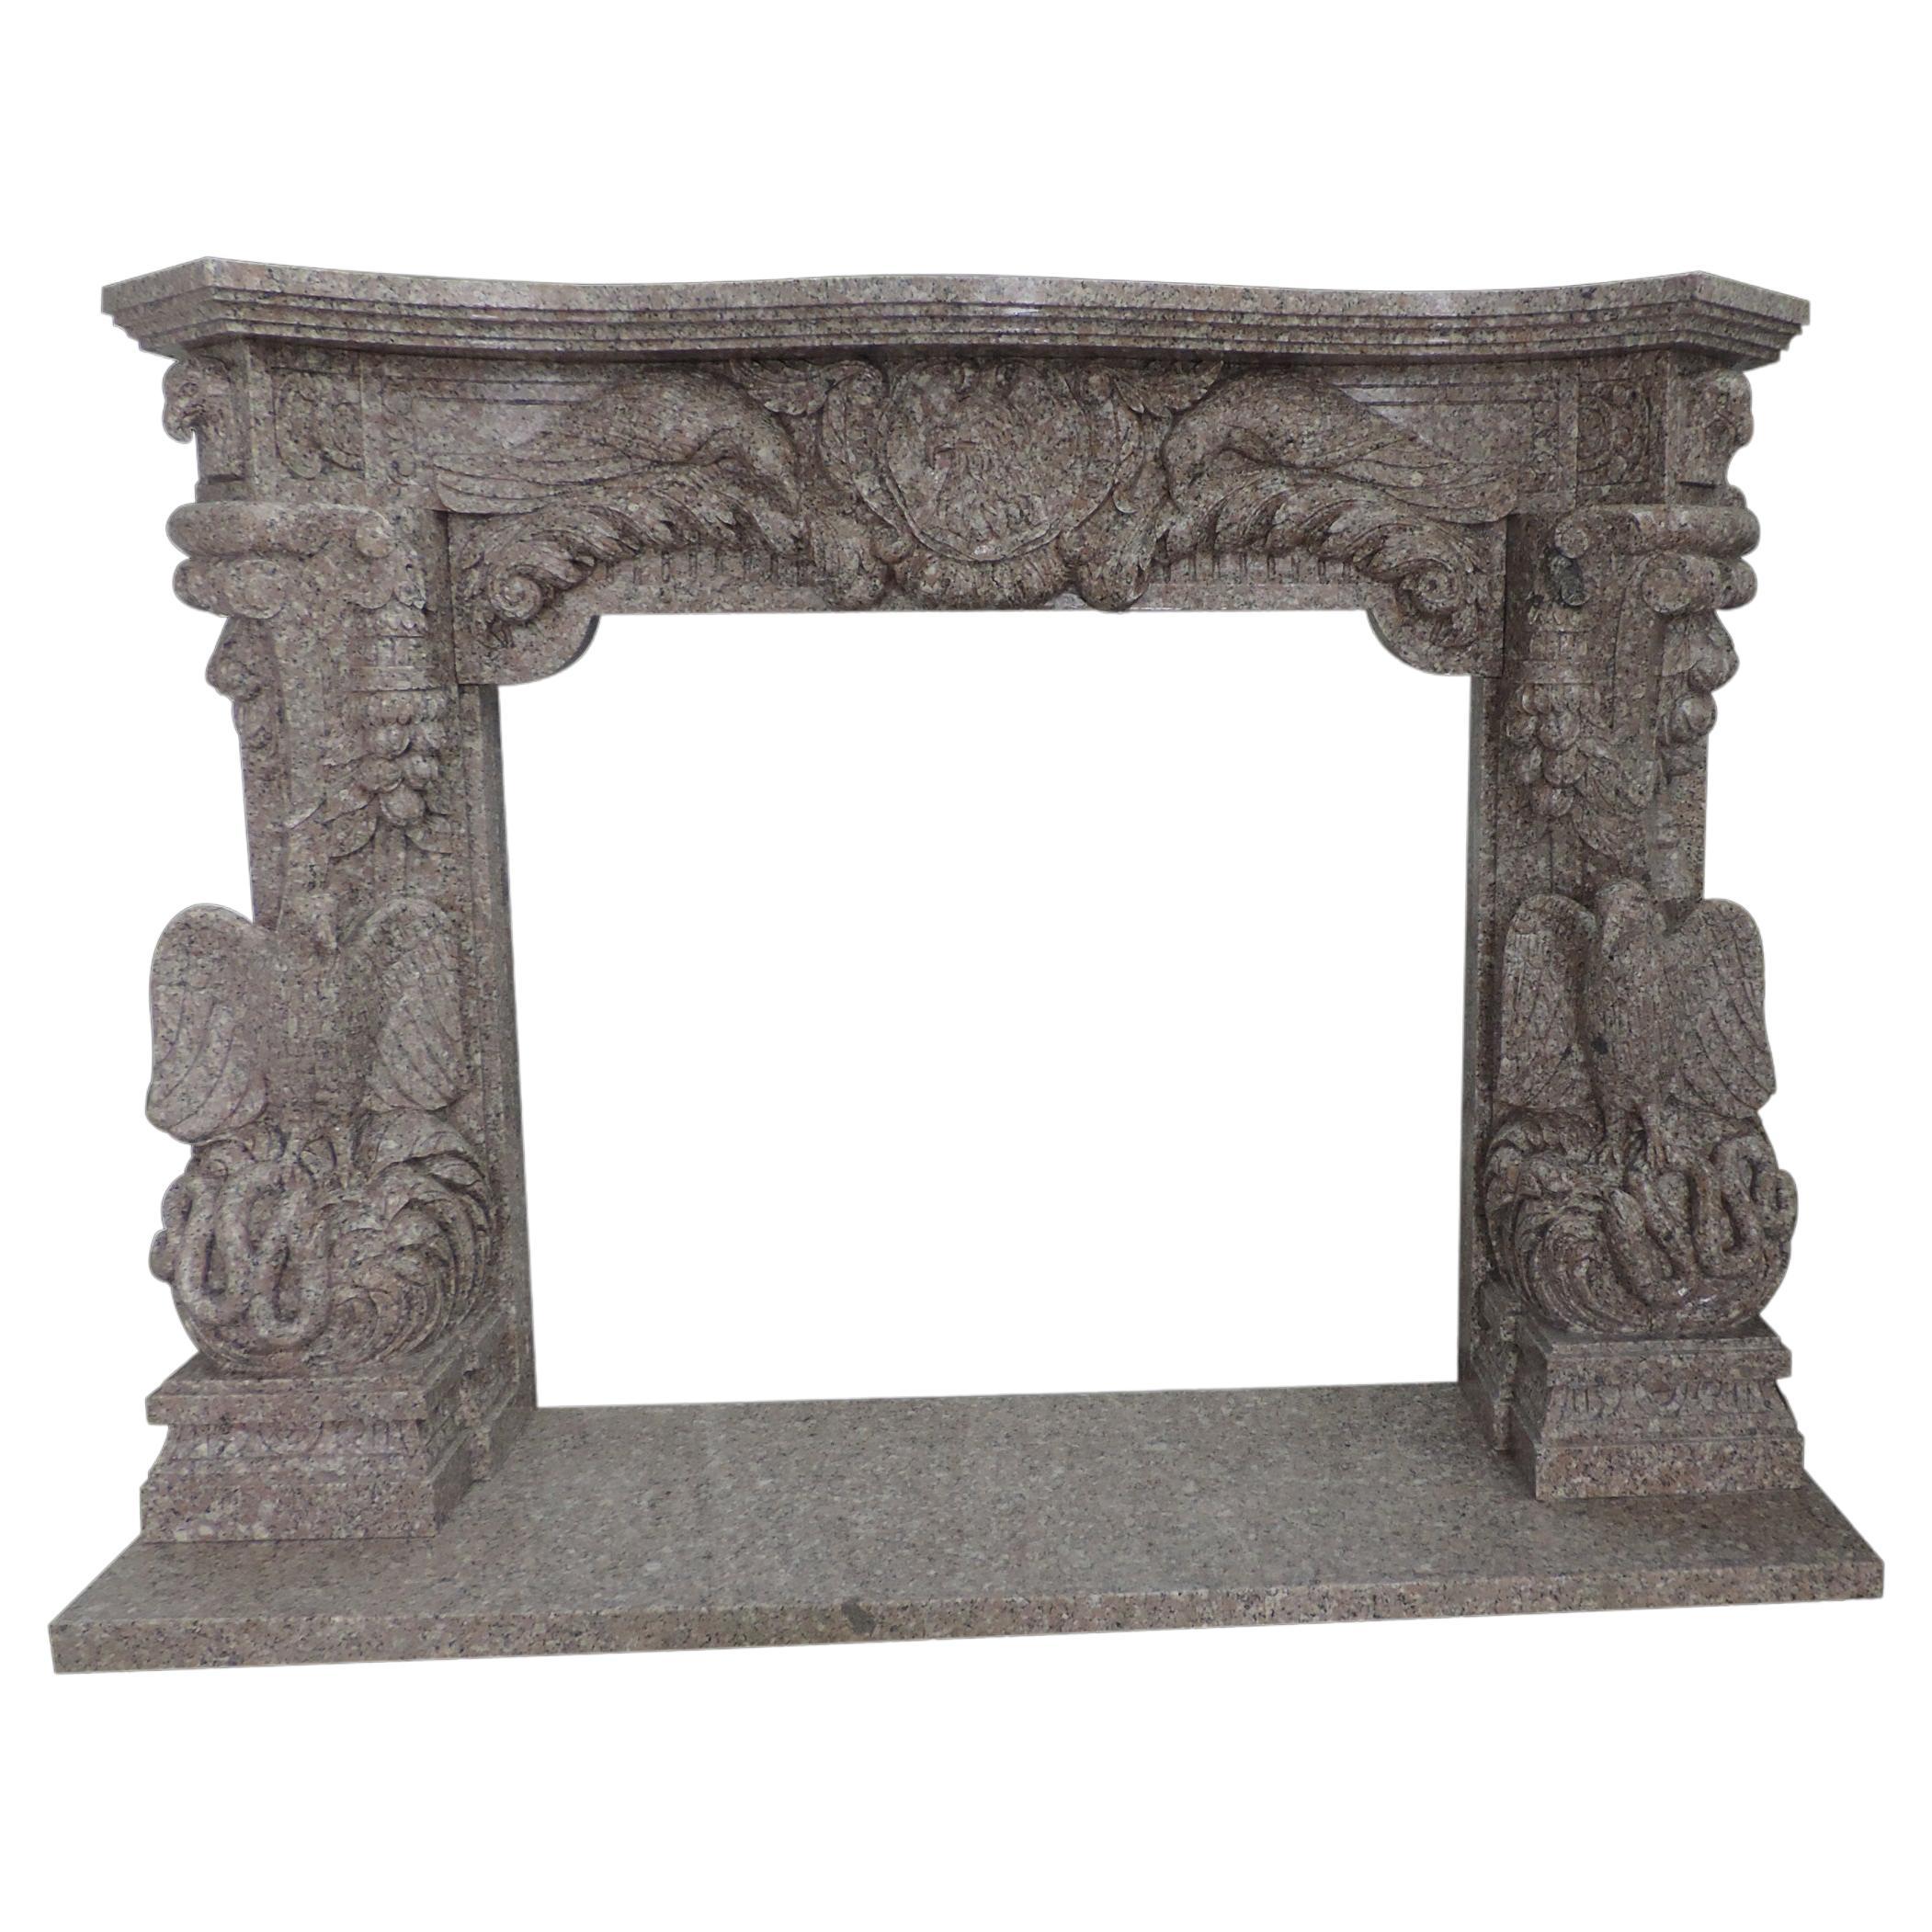 Hand Carved French Style Ornate Granite Eagle Themed Fire Surround For Sale